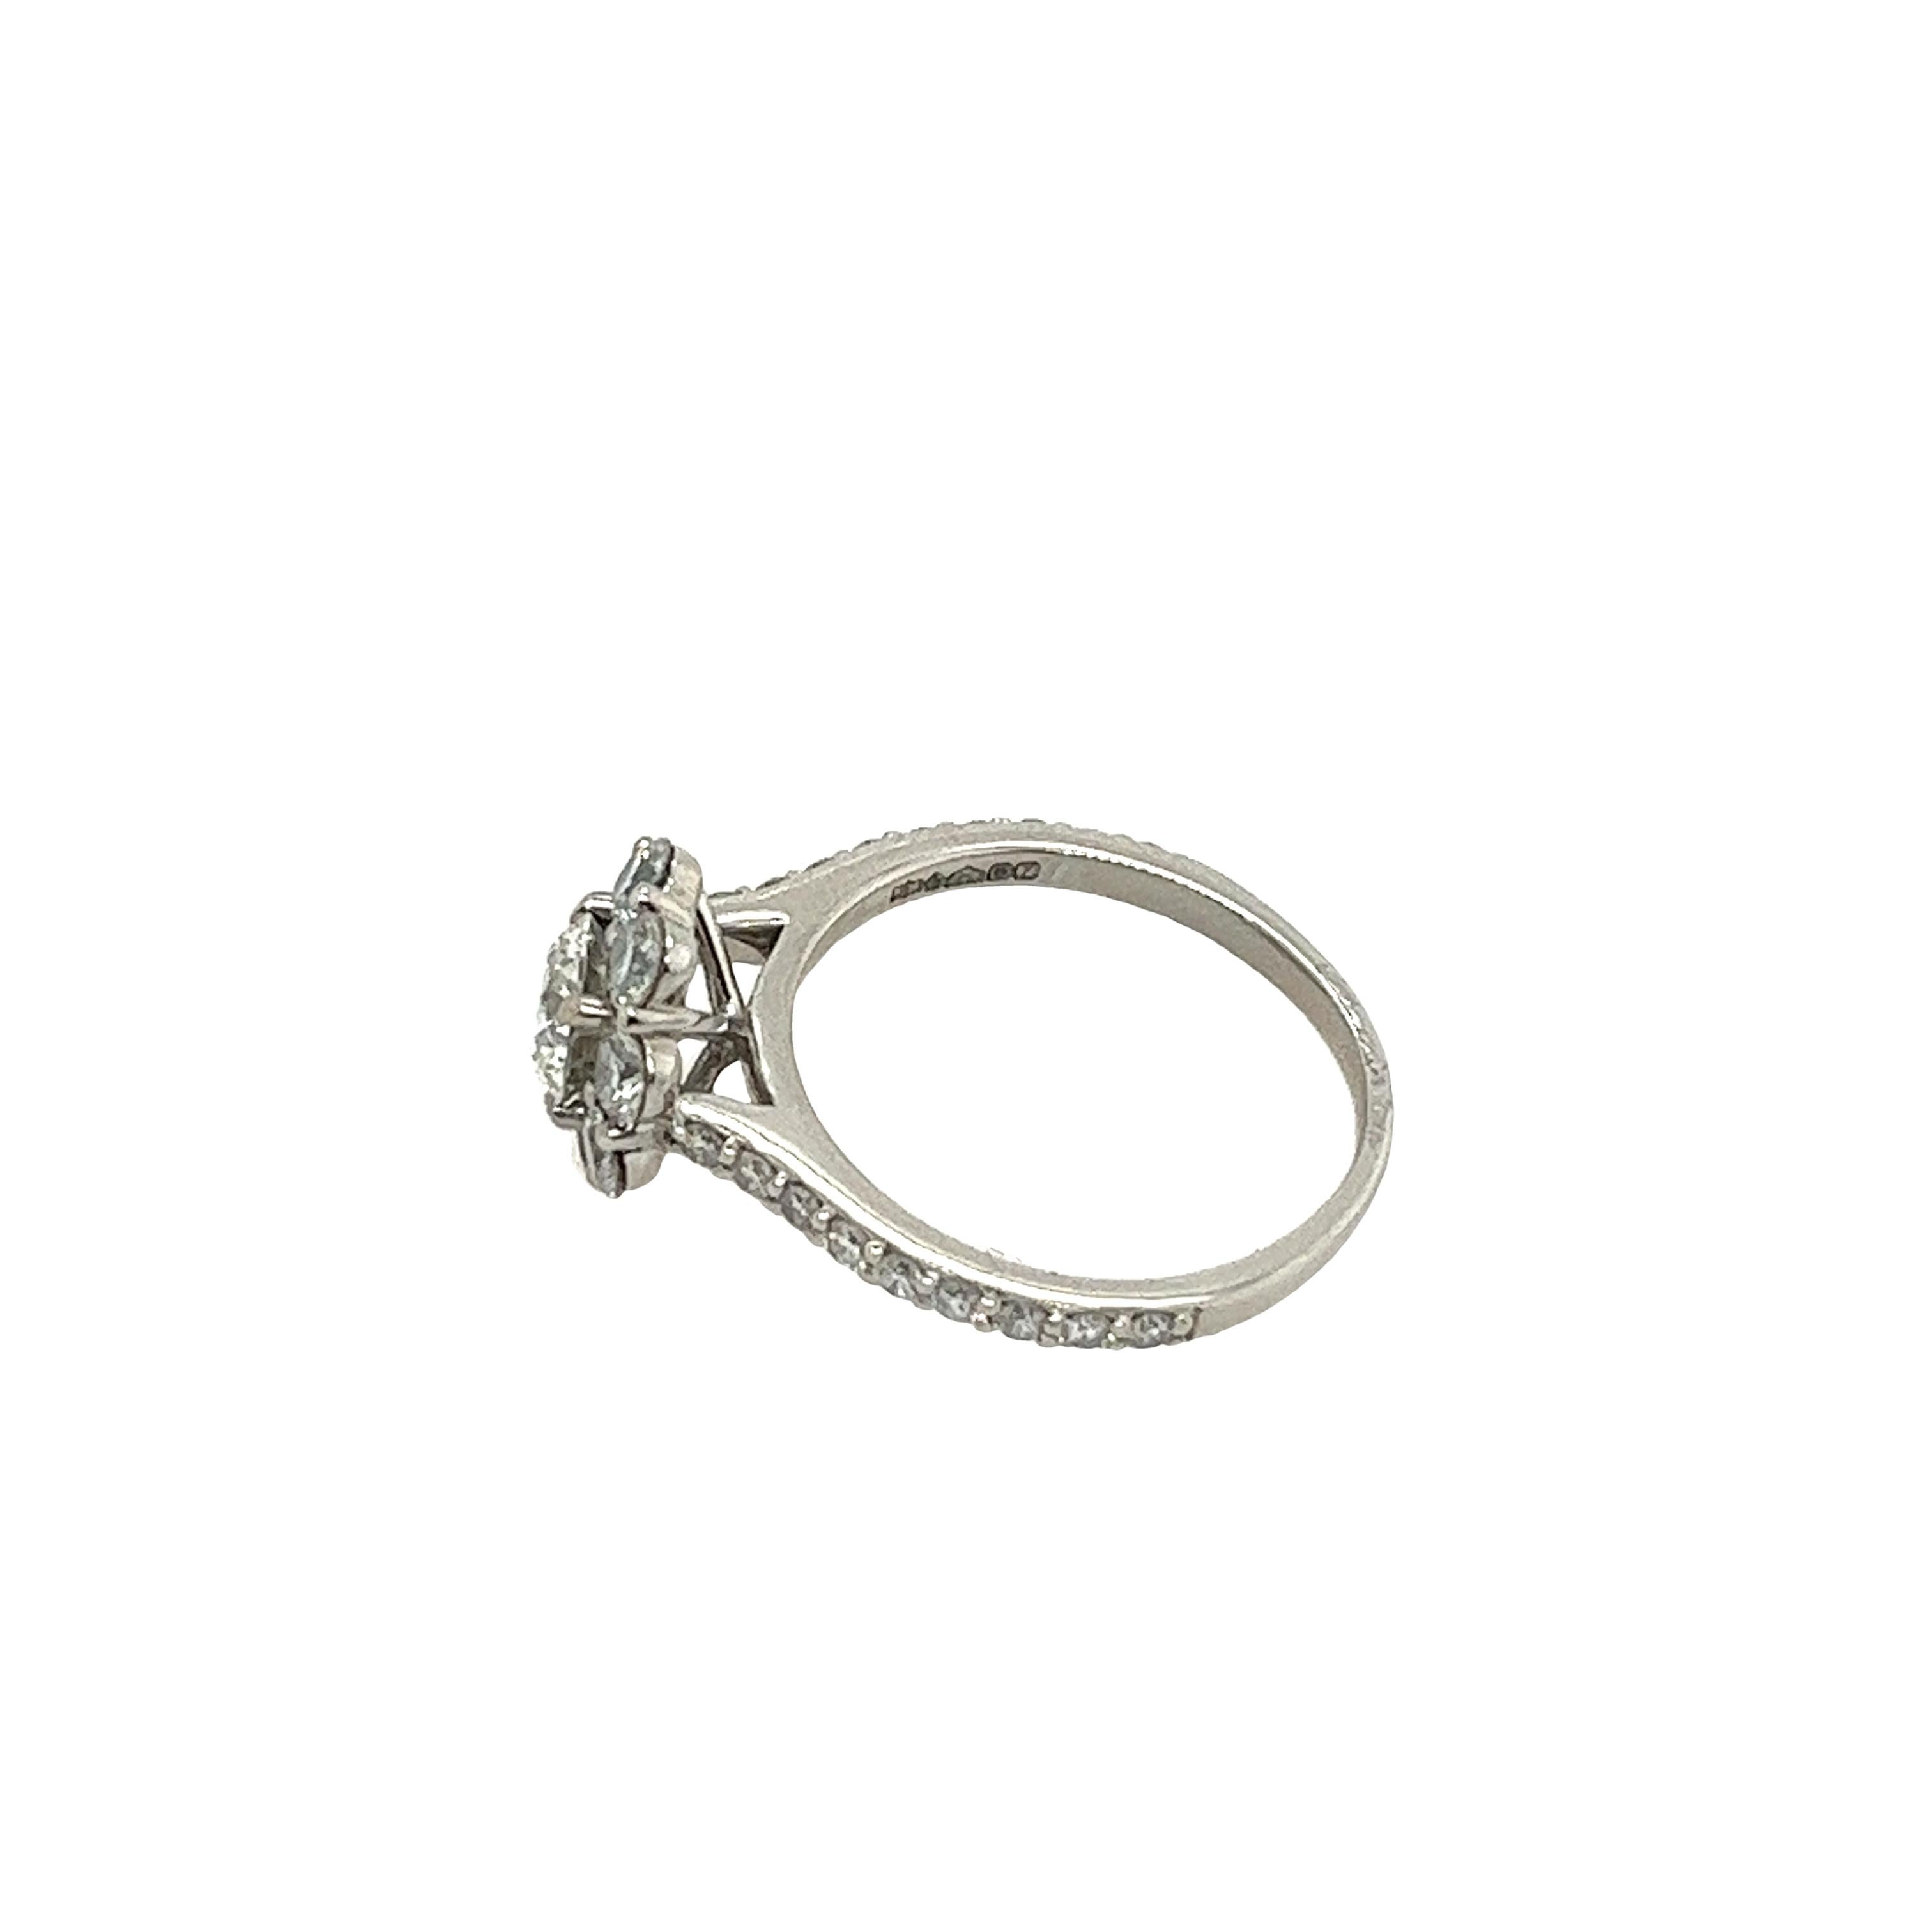 An elegant diamond ring for your engagement, 
set with 0.70ct H colour and SI2 clarity GIA certified
natural round cut diamond, 
surrounded by 8 round diamonds and 18 diamonds on the shoulders 
in a platinum setting.
A beautiful and elegant choice